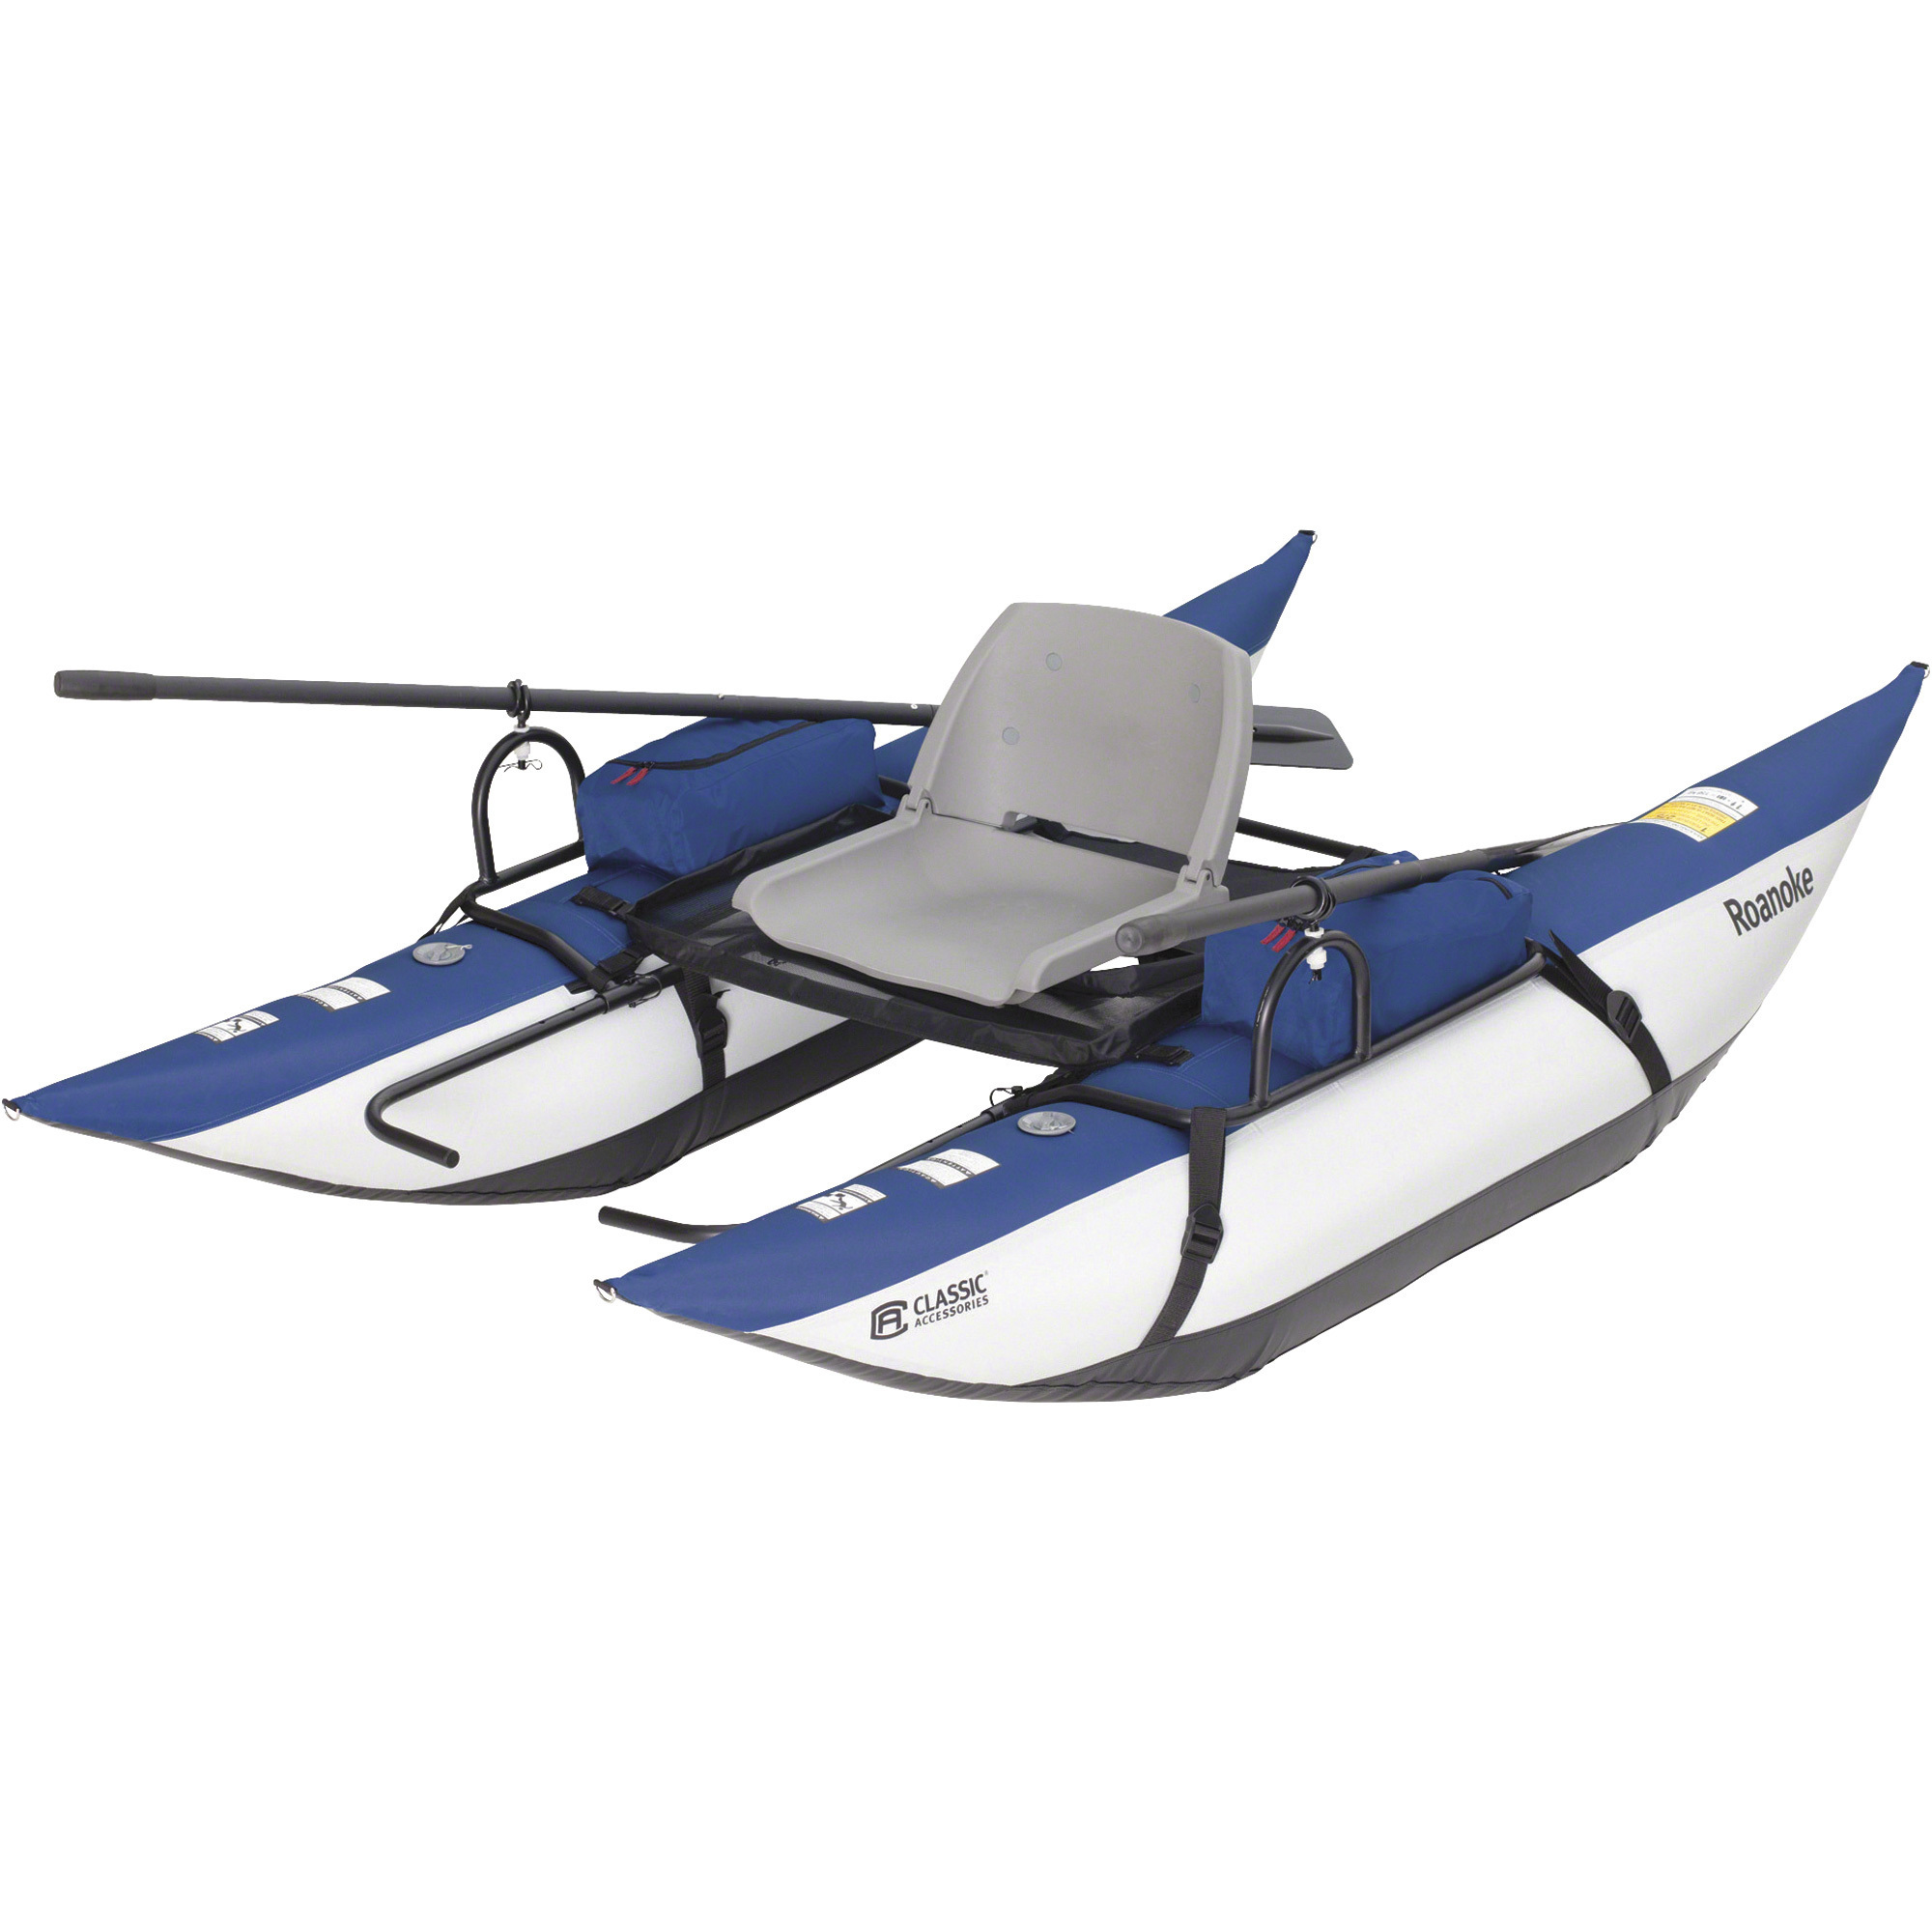 Classic Accessories Roanoke Inflatable Pontoon Boat, Blueberry and